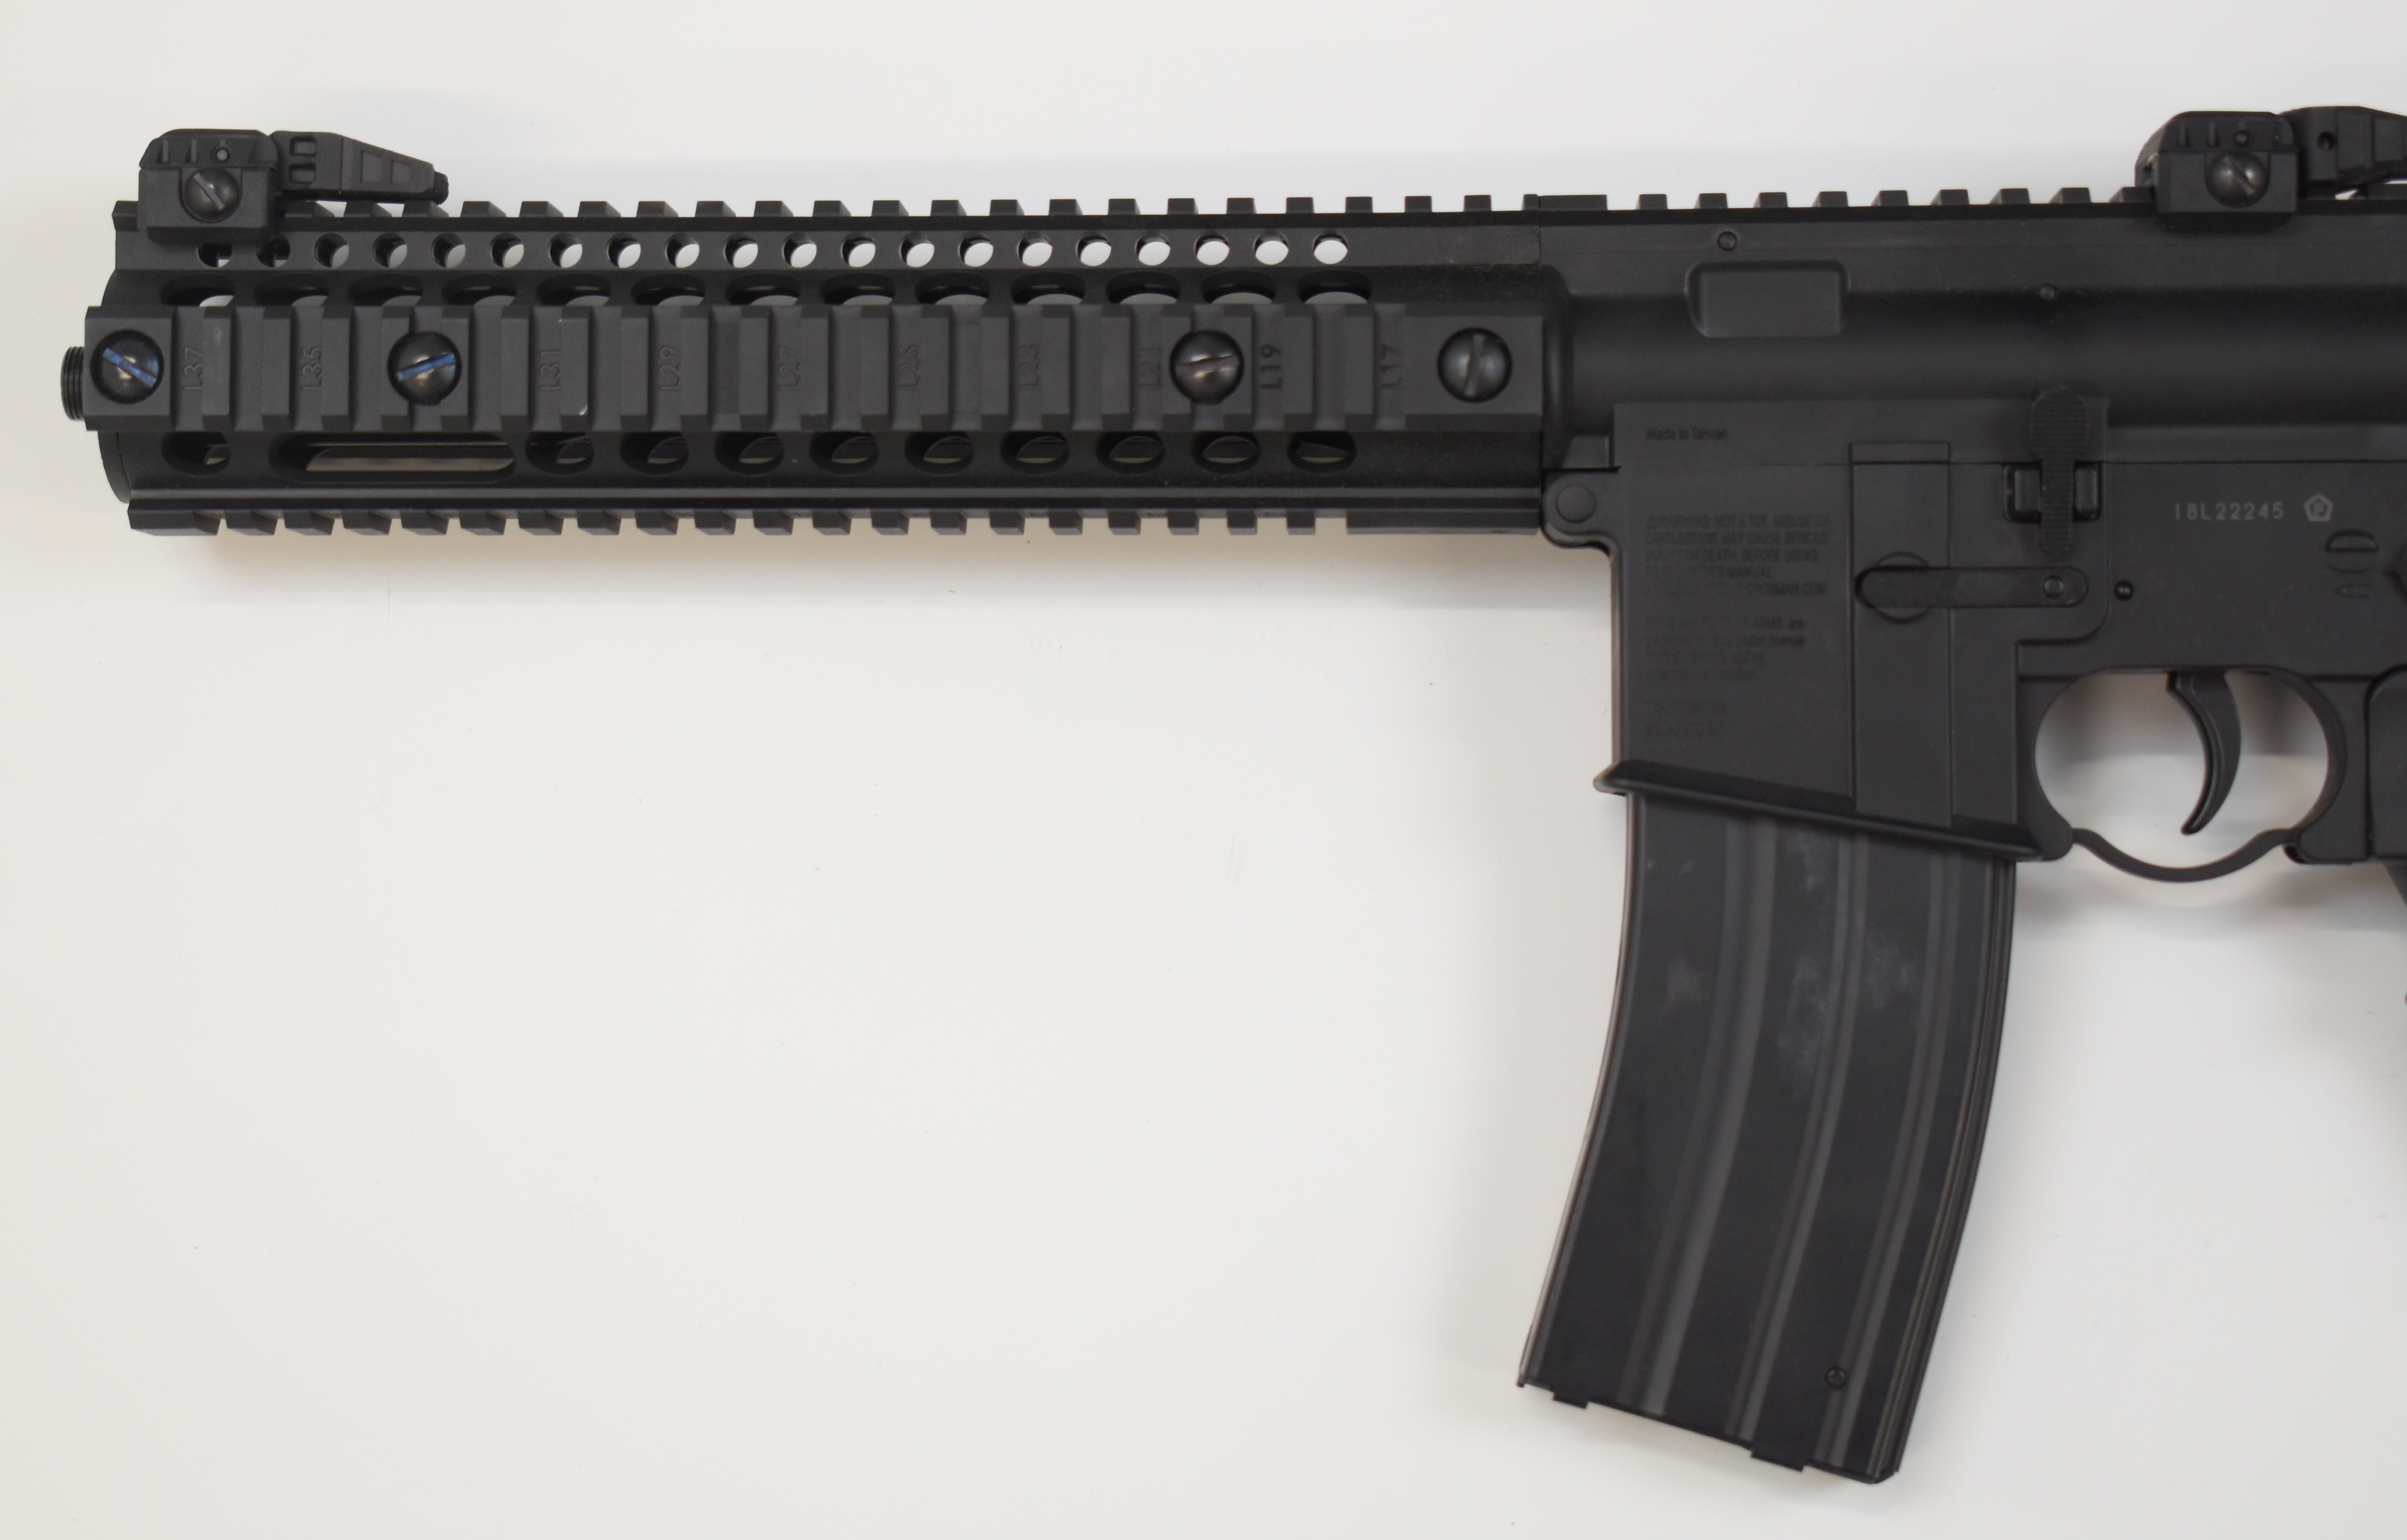 Crosman SBR .177 CO2 assault style air rifle with textured pistol grip, tactical stock, multi-shot - Image 8 of 9